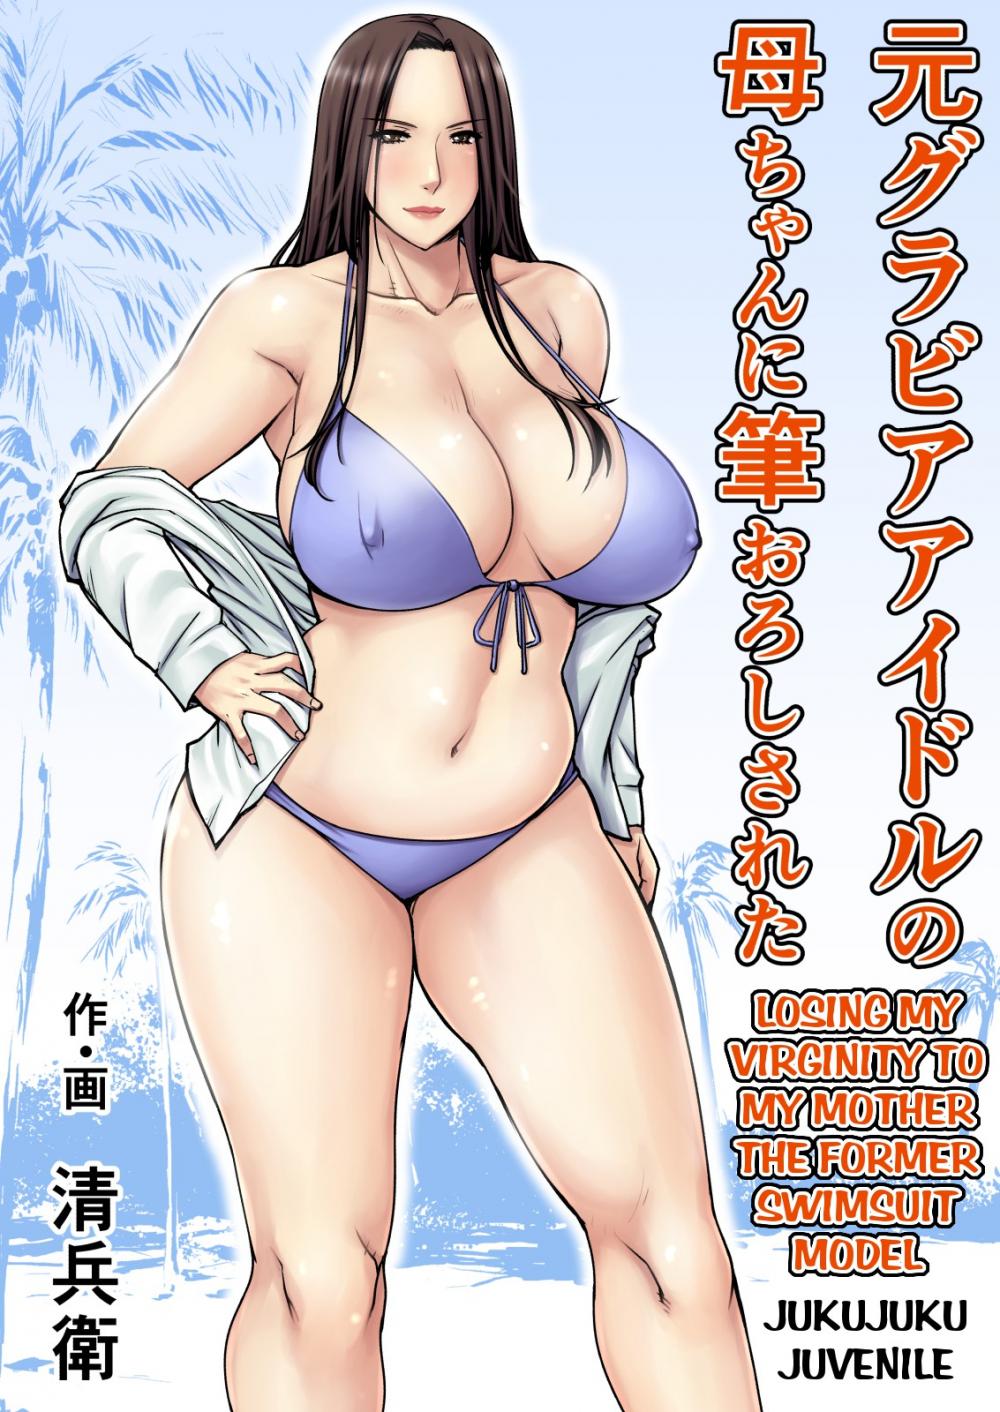 Hentai Manga Comic-Losing my Virginity to my Mother the Former Swimsuit Model-Chapter 1-1